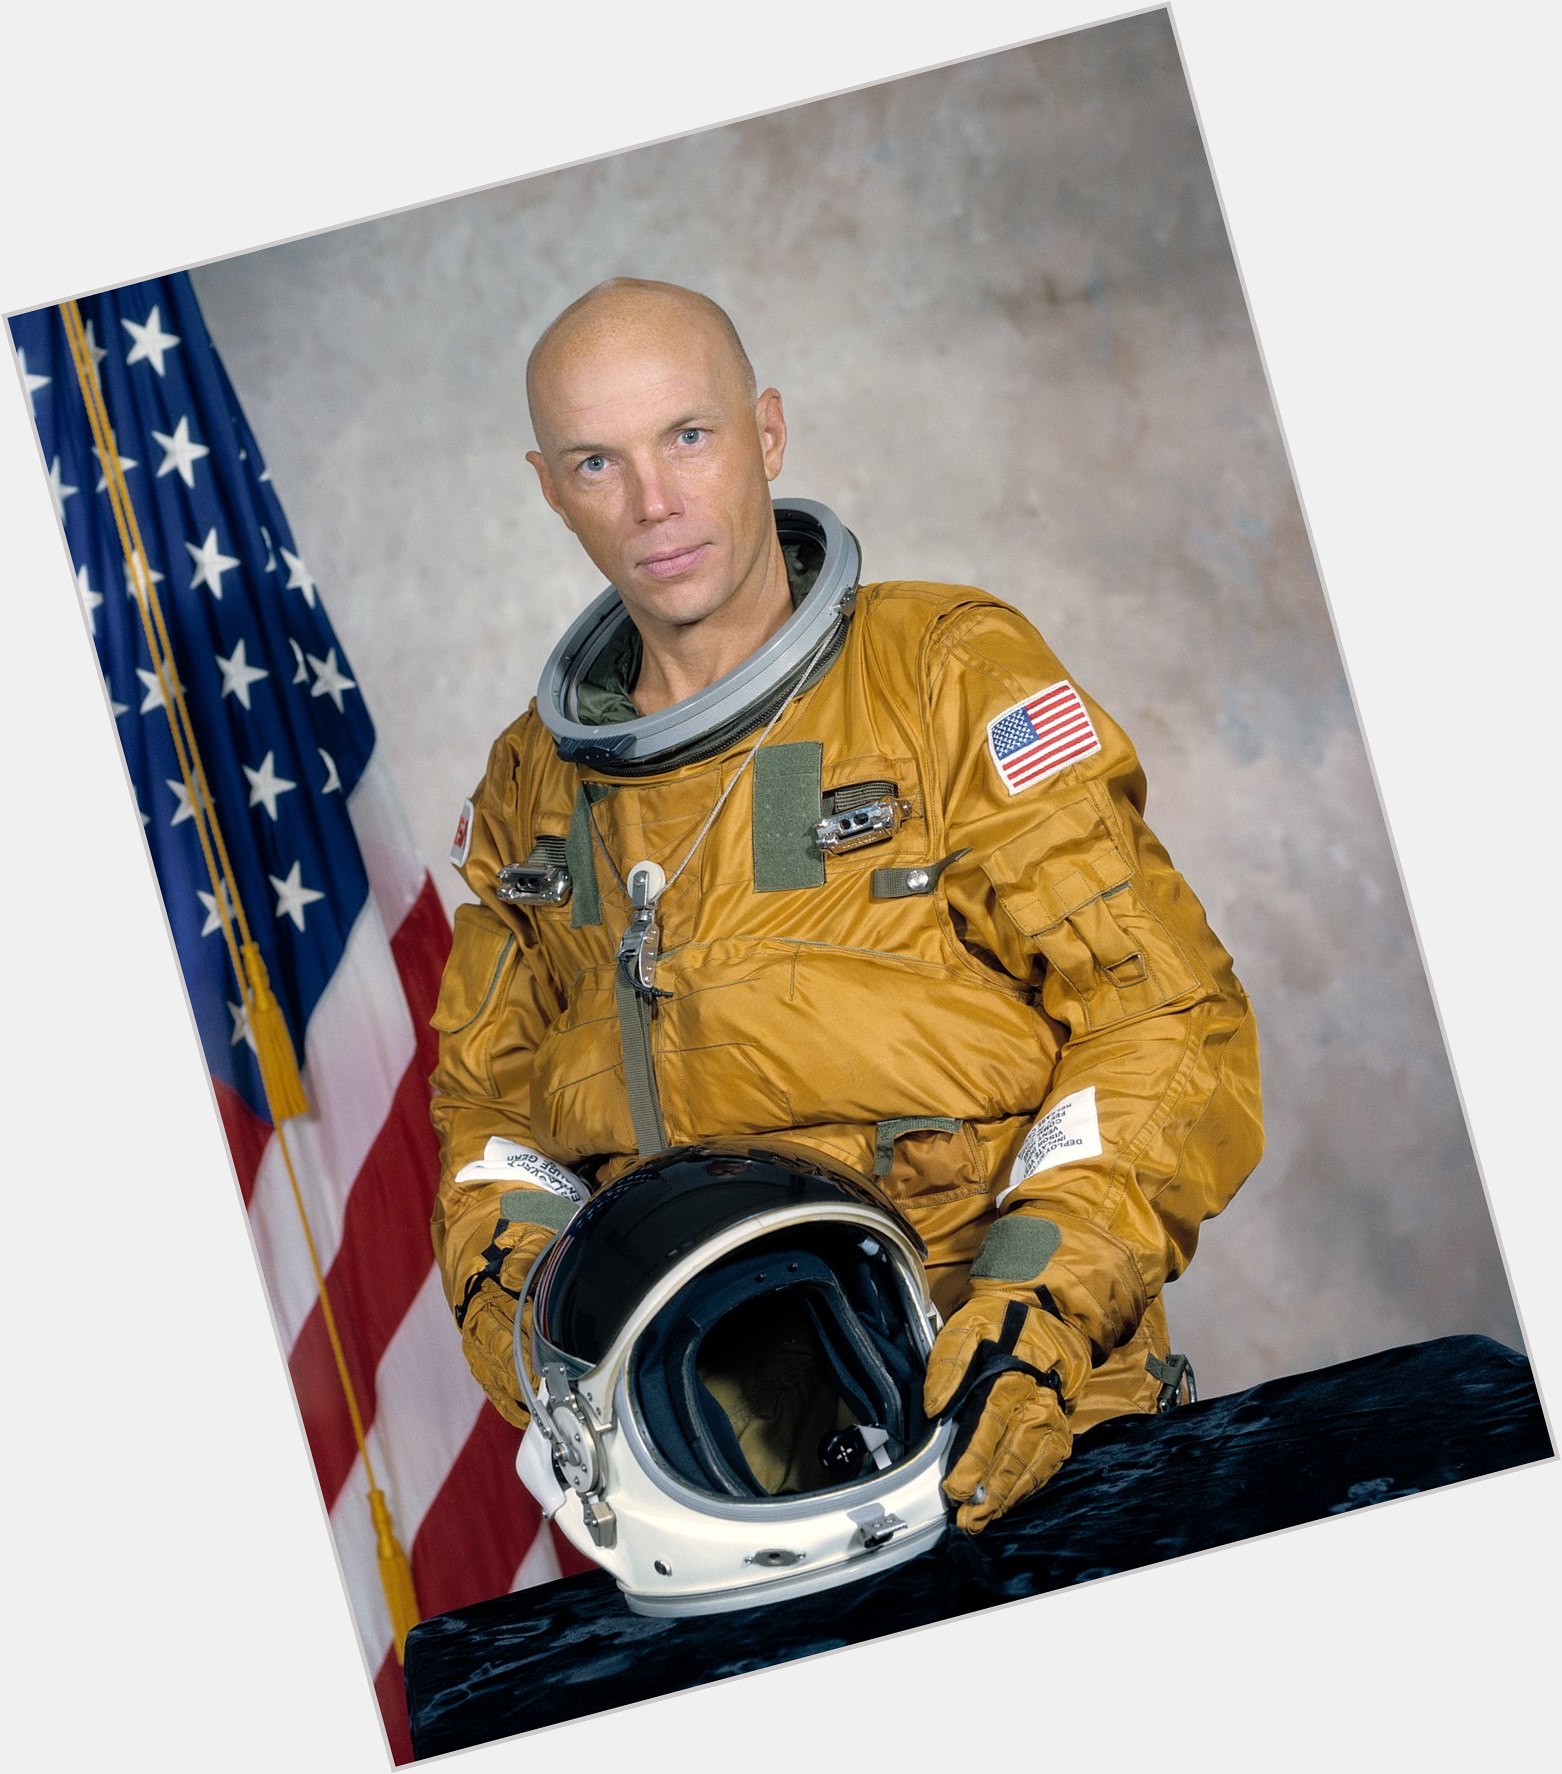 Https://fanpagepress.net/m/S/Story Musgrave Dating 2